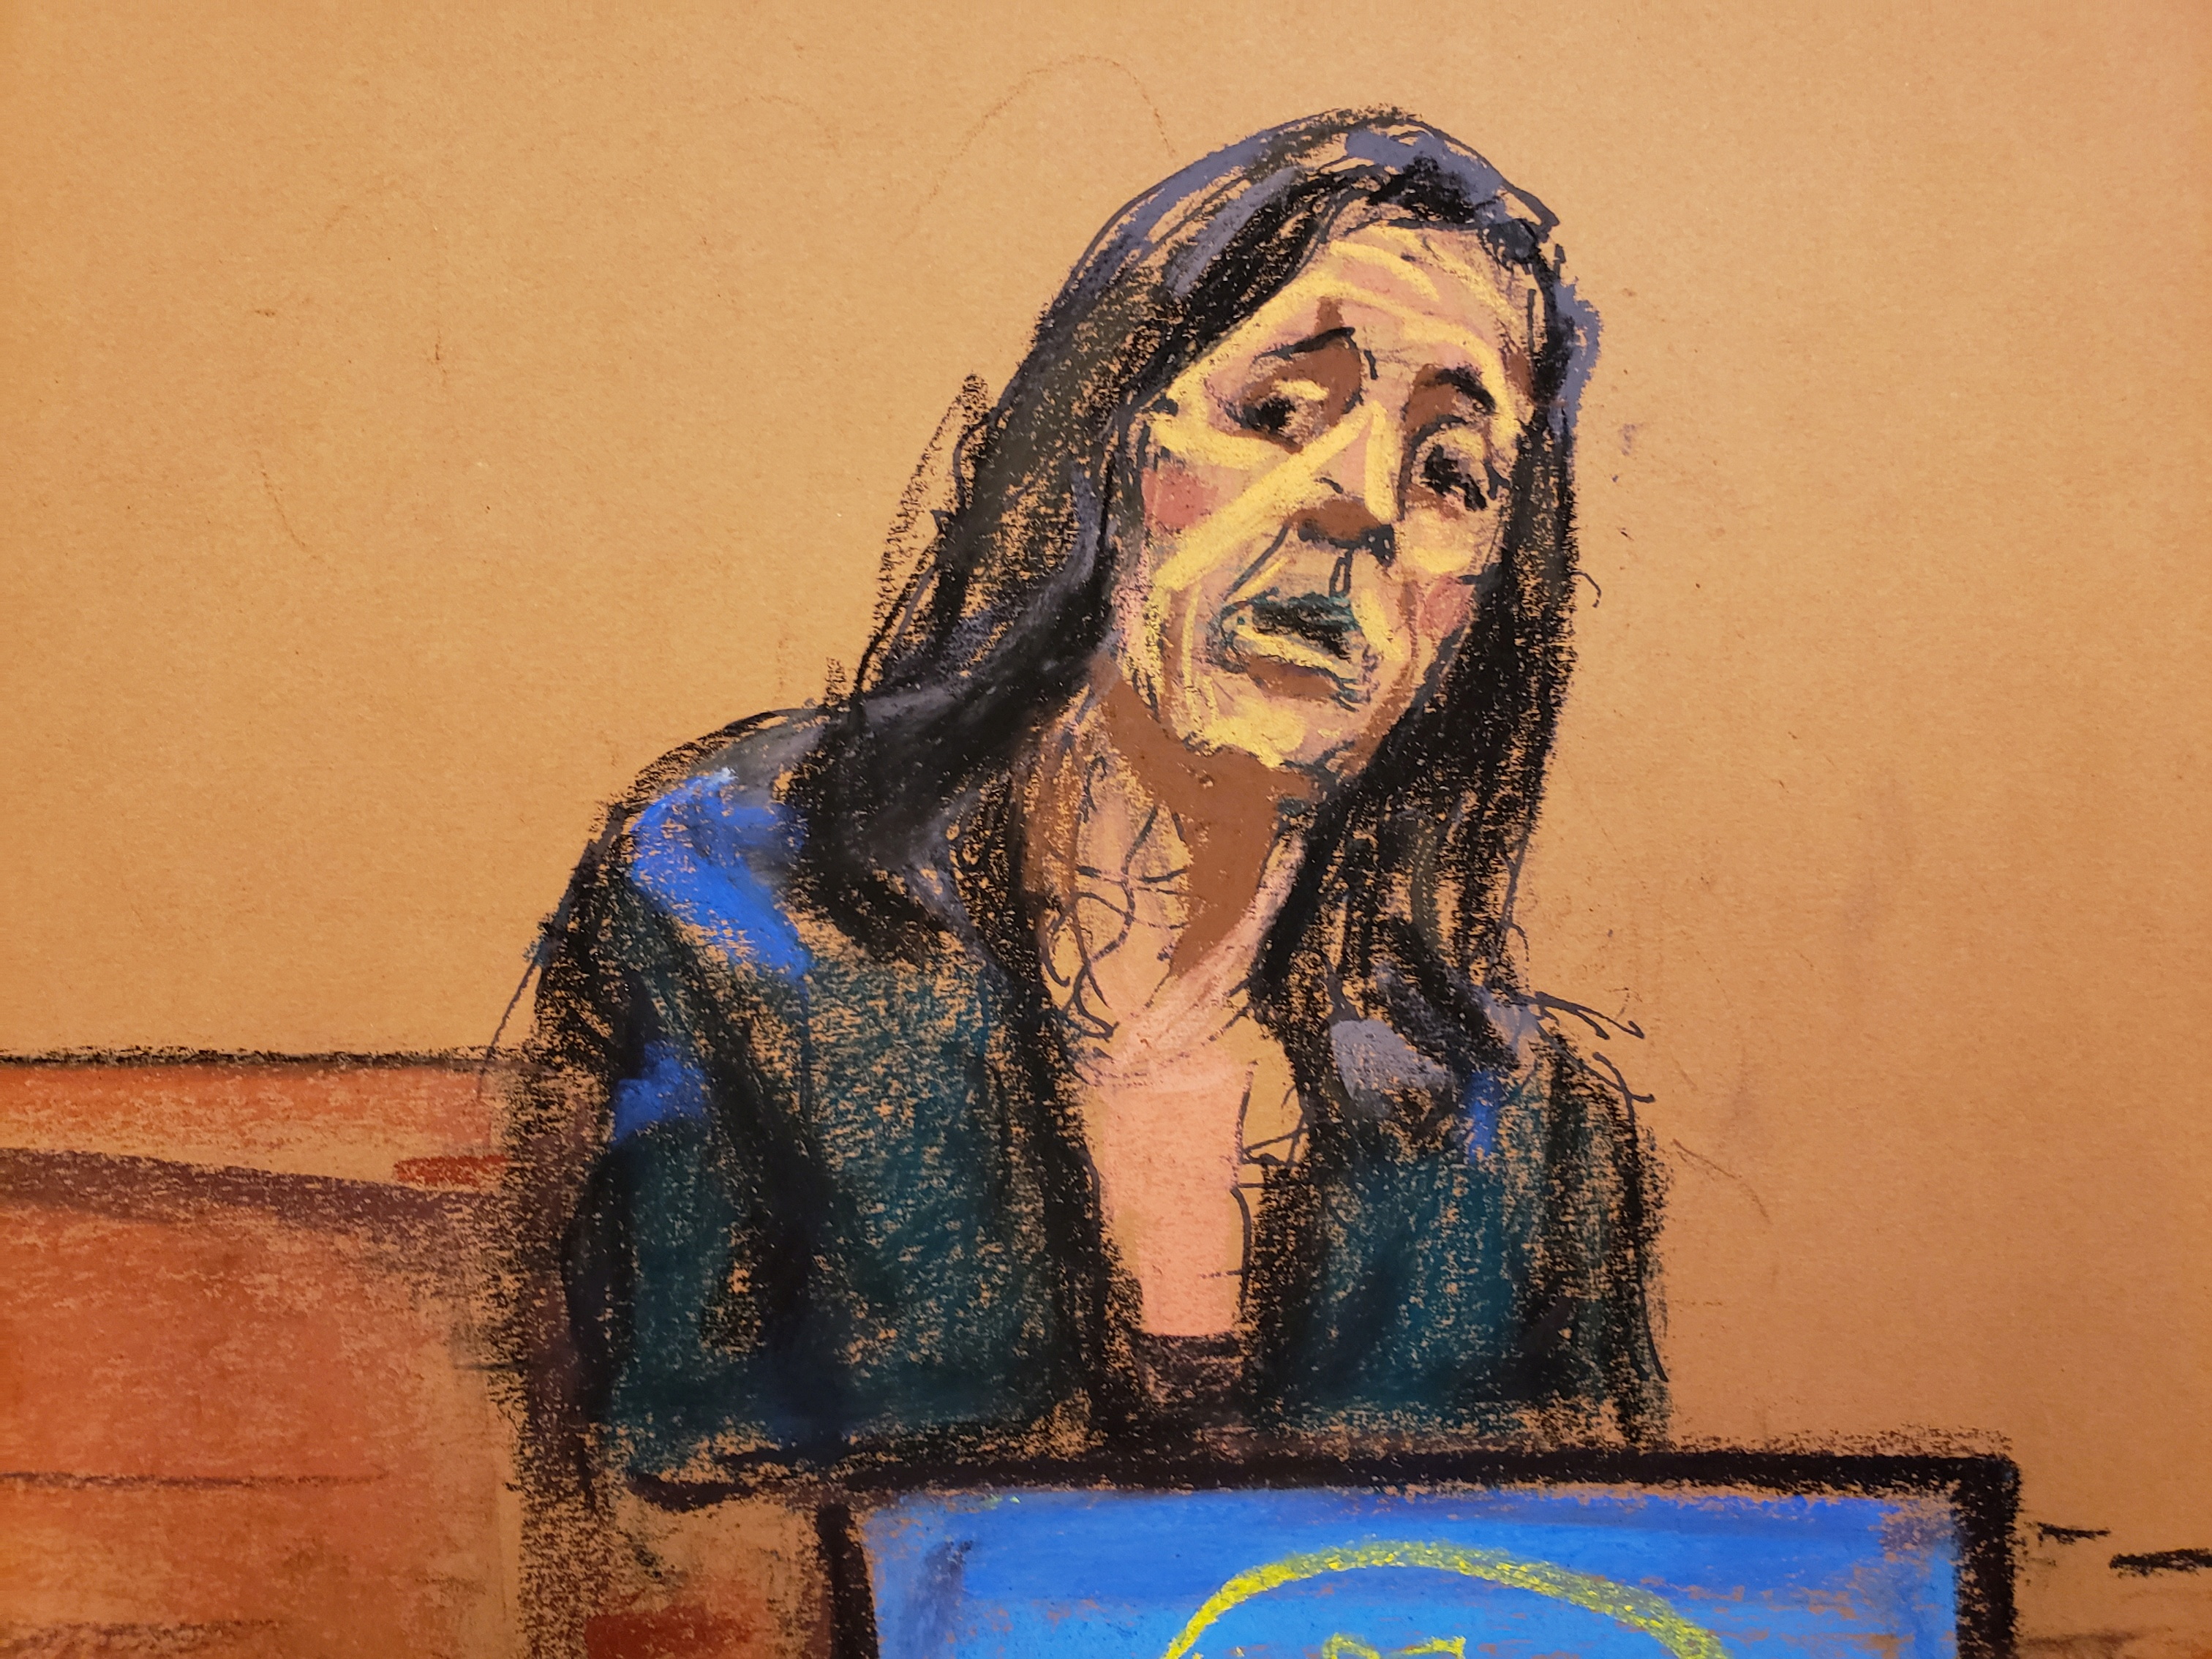 Psychologist Lisa Rocchio testifies during the trial of Ghislaine Maxwell, the Jeffrey Epstein associate accused of sex trafficking, in a courtroom sketch in New York City, U.S., December 2, 2021. REUTERS/Jane Rosenberg